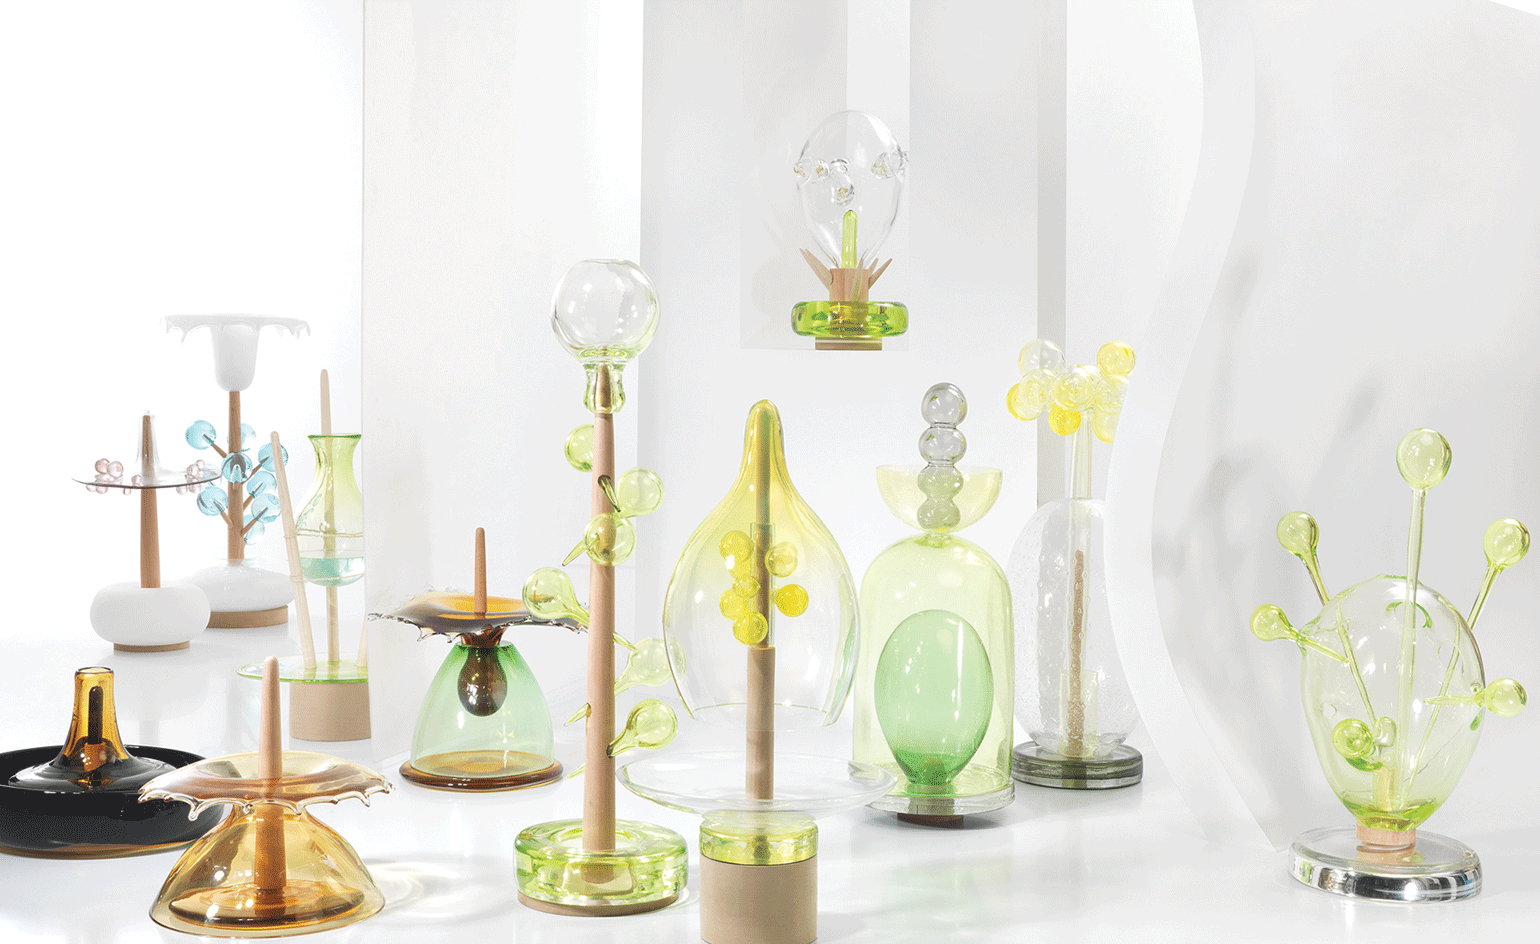 View of The Glass Calendar collection by Ruinart and Hubert le Gall featuring different colours and shapes pictured against a light coloured background